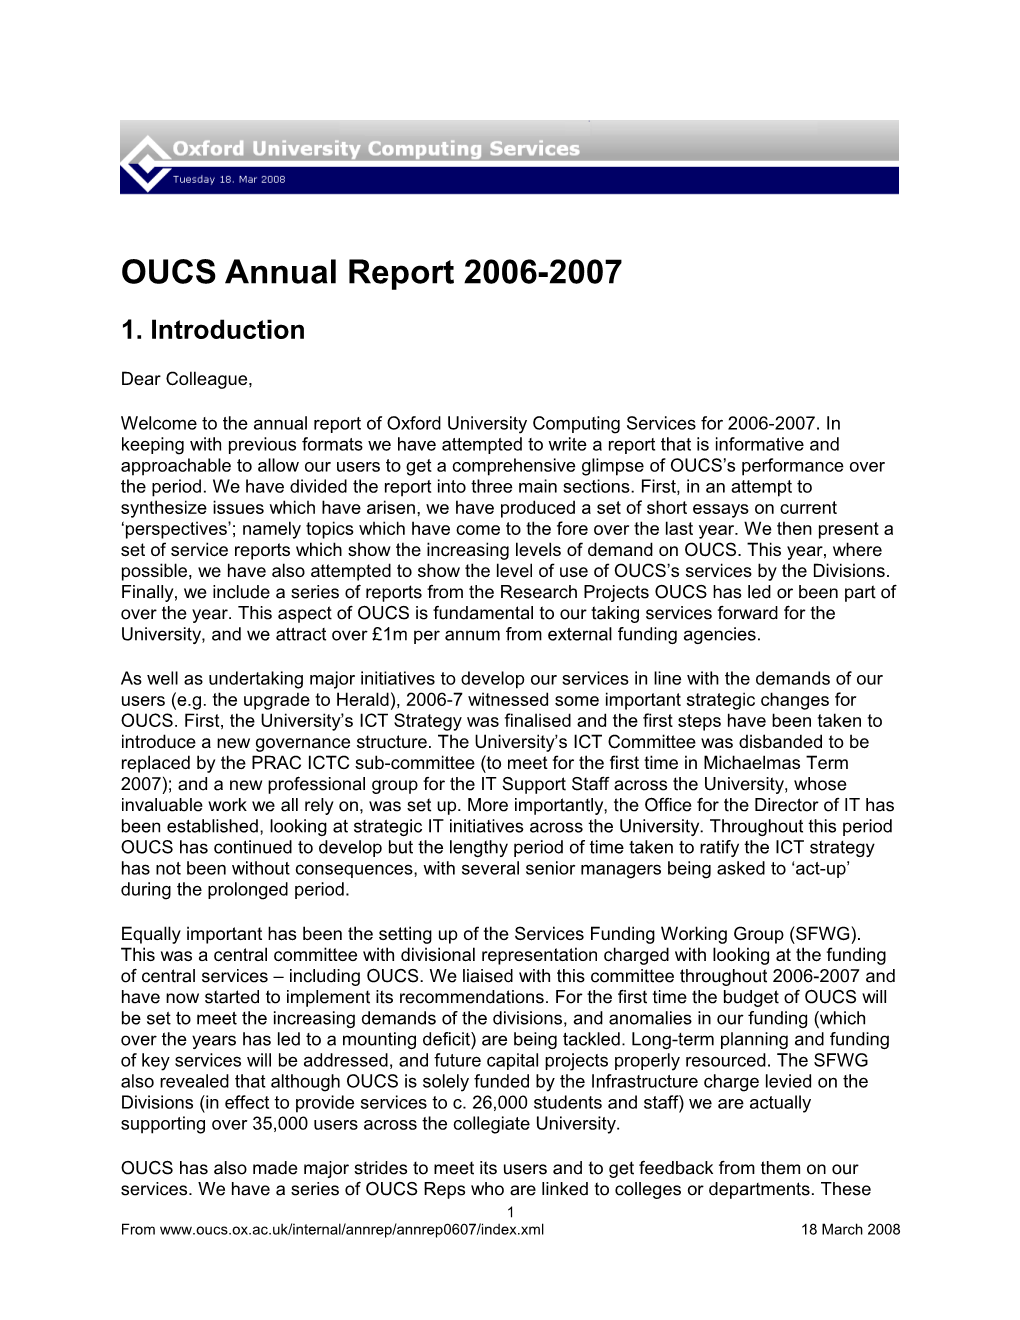 OUCS Annual Report 2006-2007